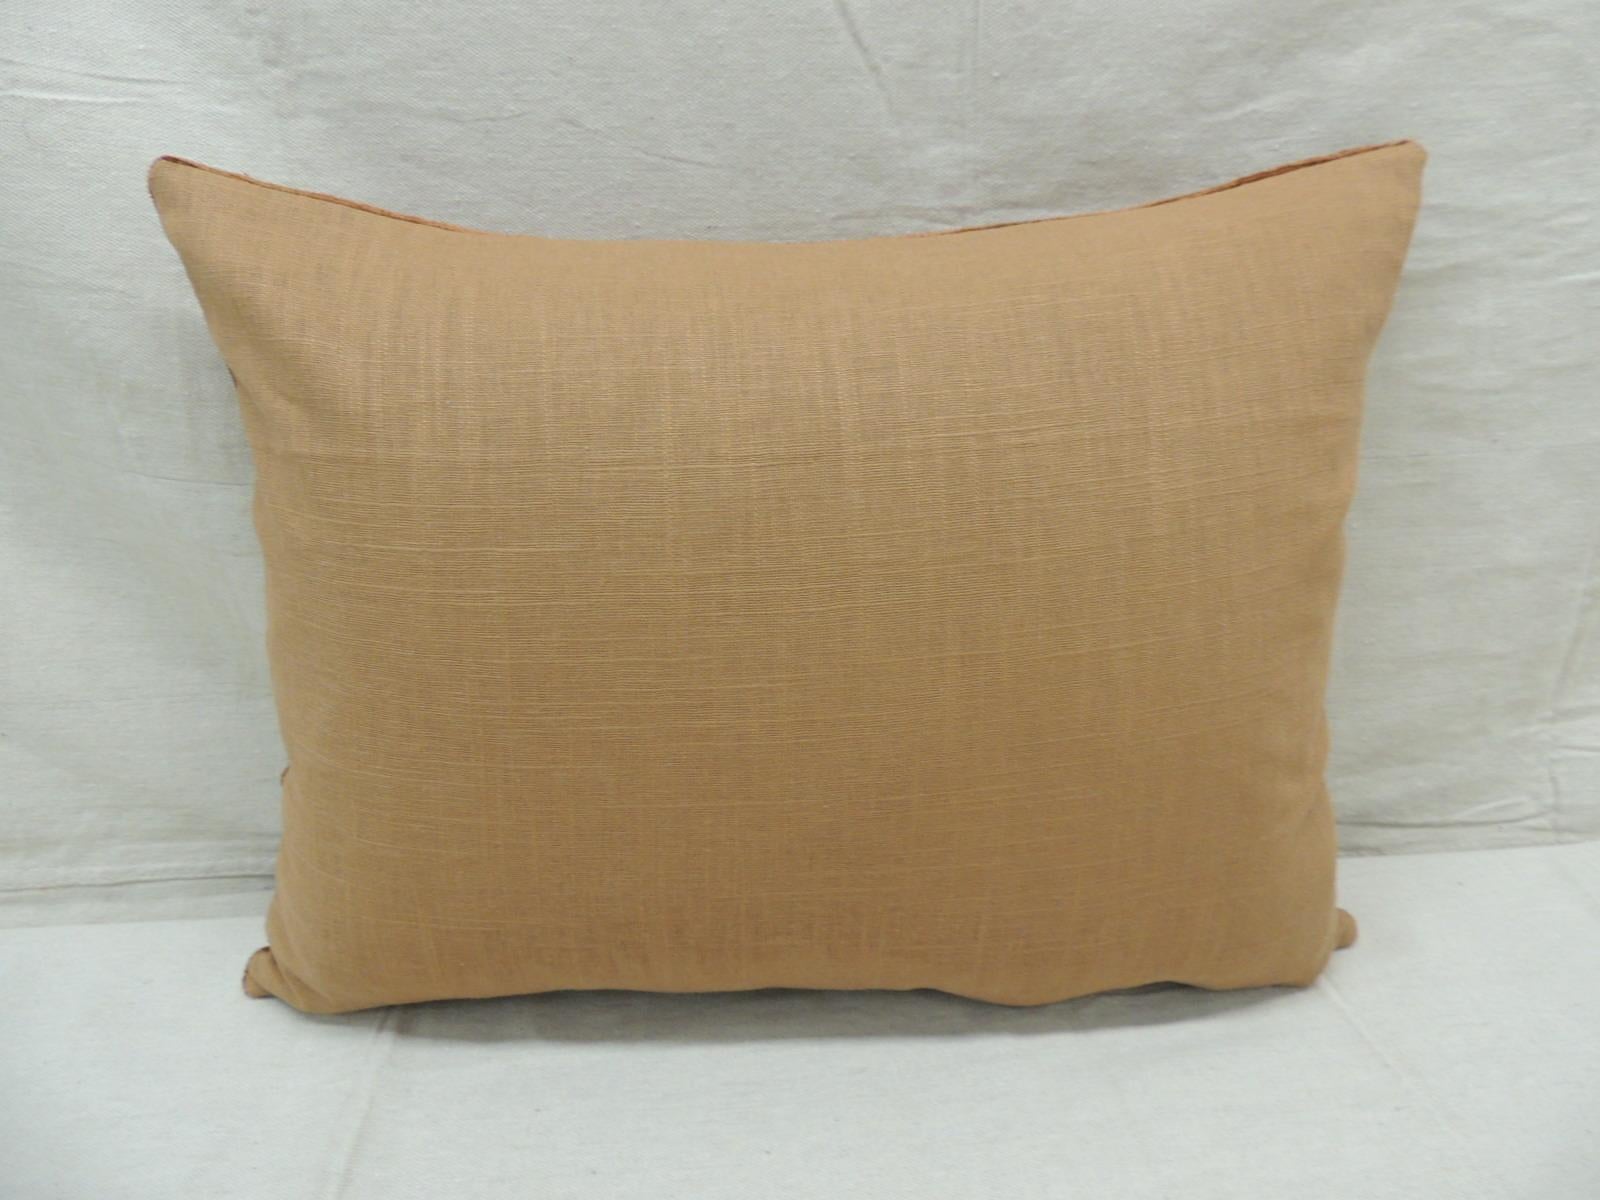 Hand-Crafted Vintage Orange and Brown Embroidery Bolster Decorative Pillow